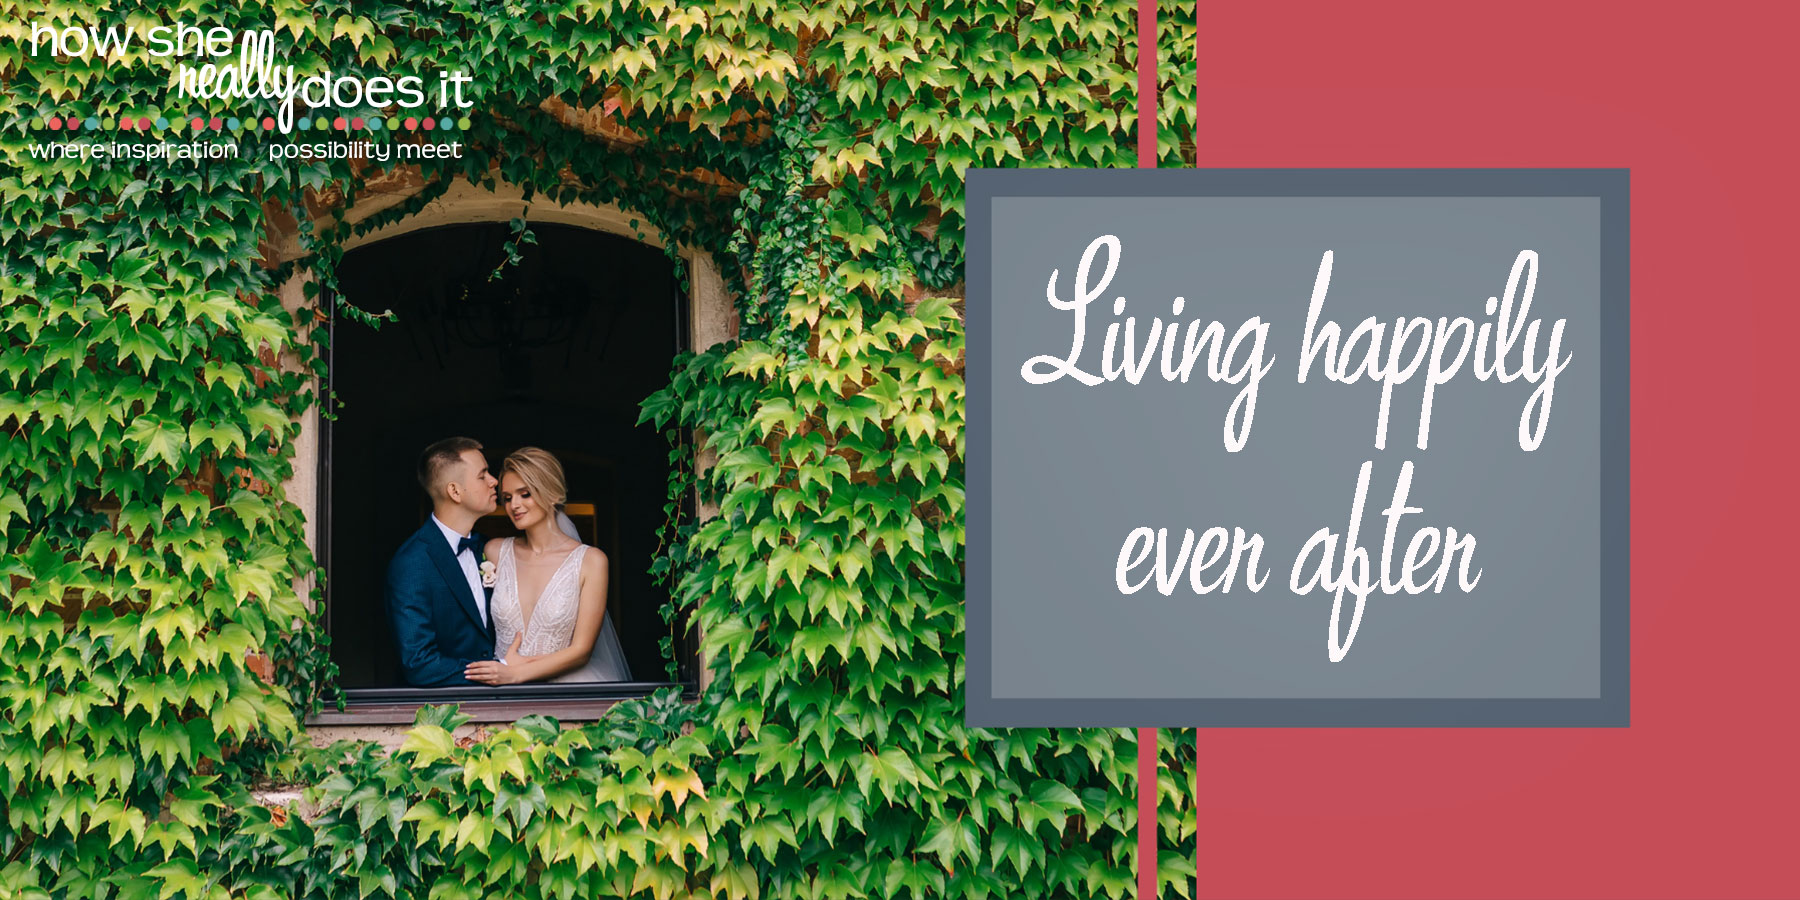 How She Really Does It with Koren Motekaitis | Living happily ever after